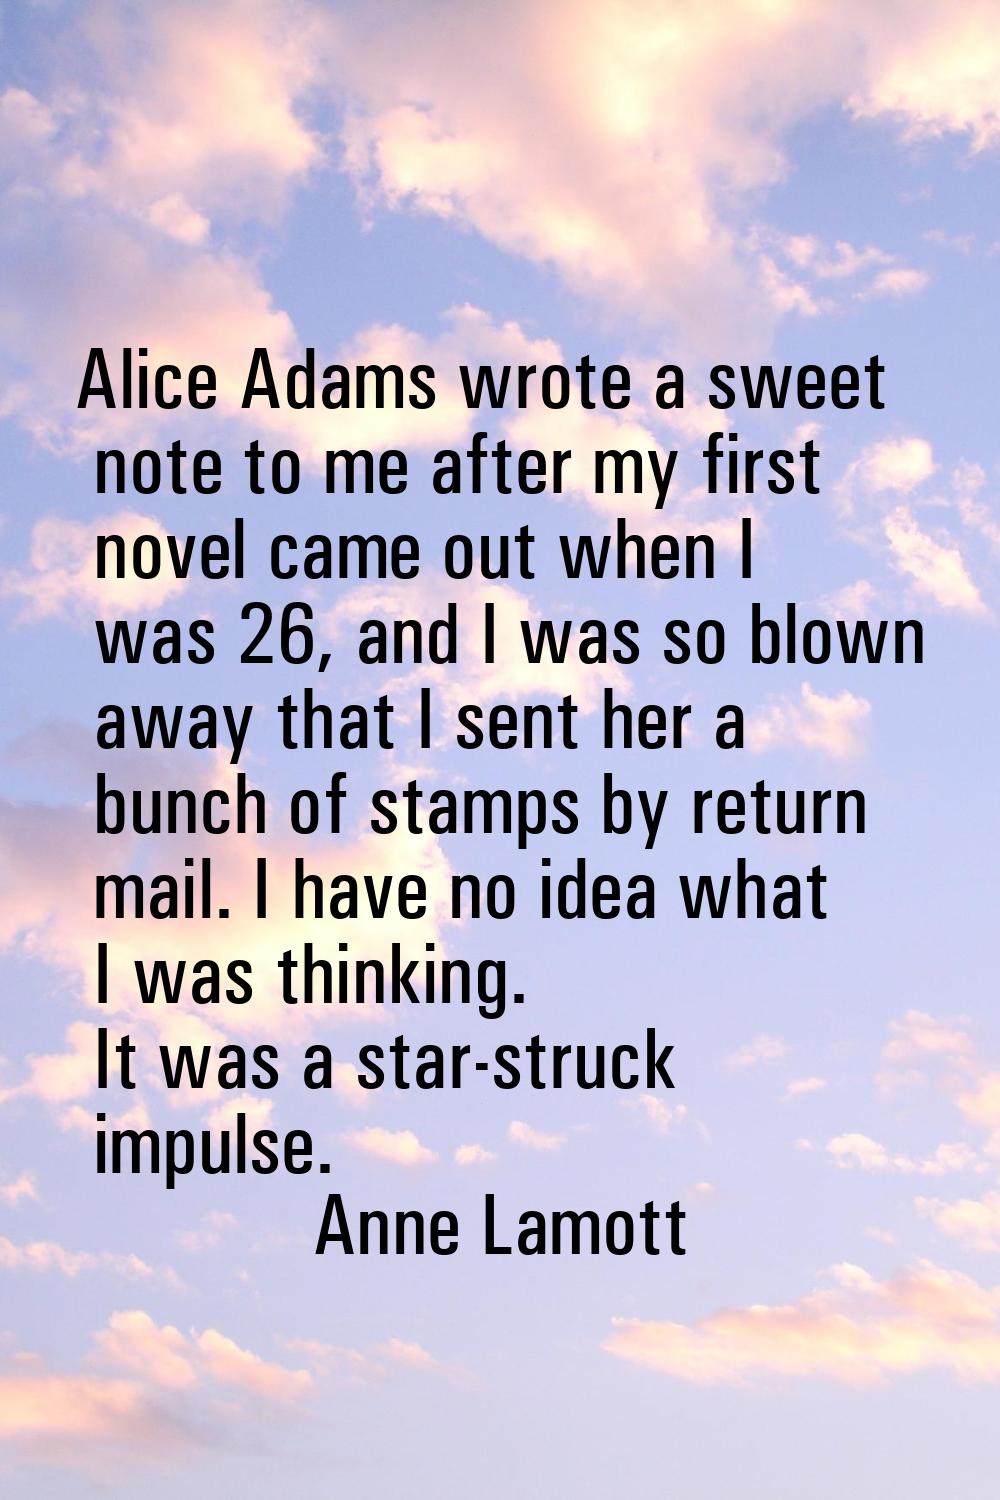 Alice Adams wrote a sweet note to me after my first novel came out when I was 26, and I was so blow